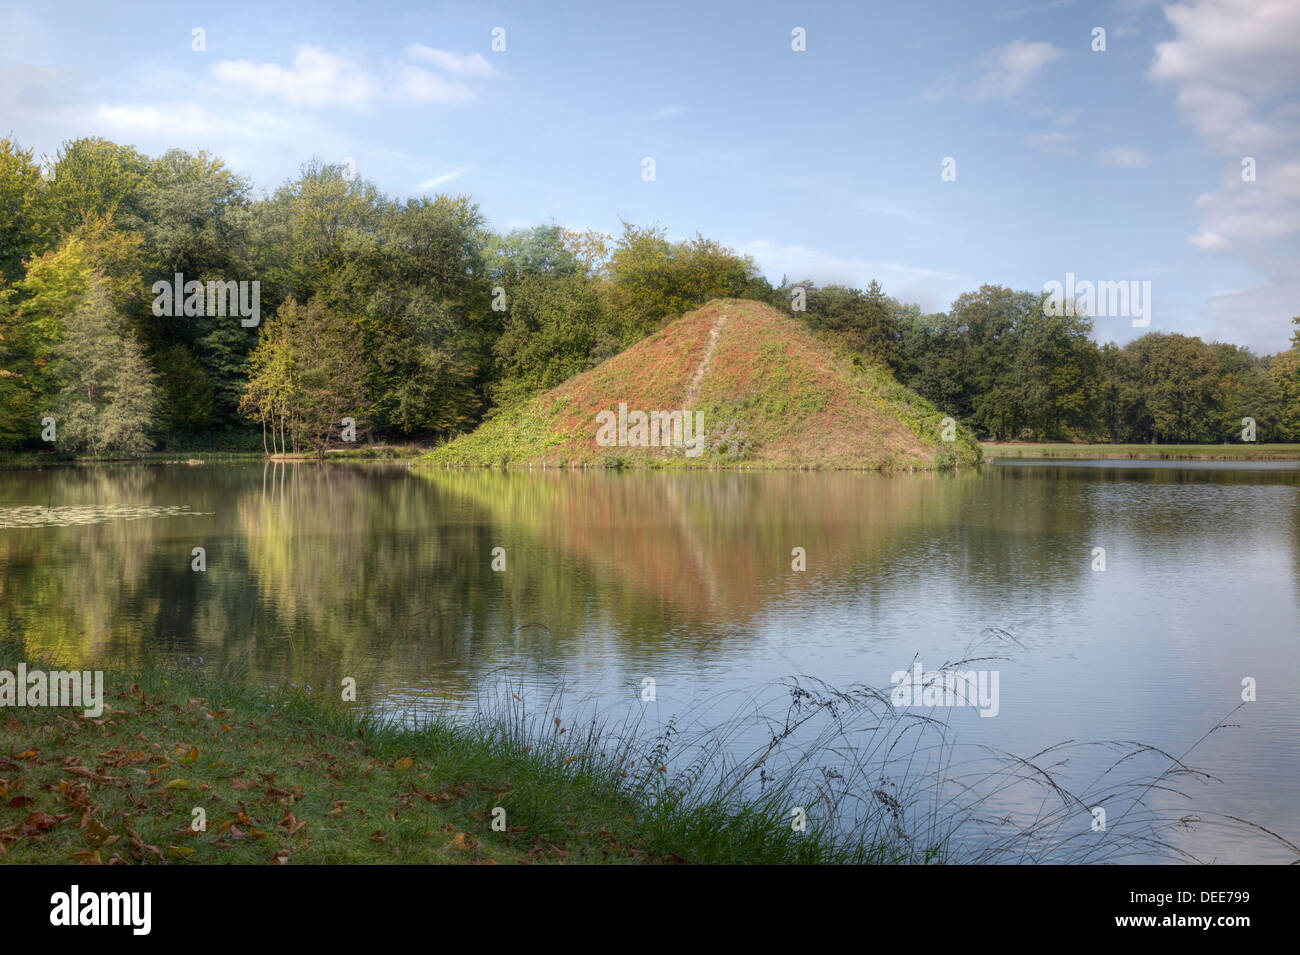 Lake Pyramid in Branitz Park, Tomb of Fuerst Pückler and his wife, Cottbus, Brandenburg, Germany Stock Photo